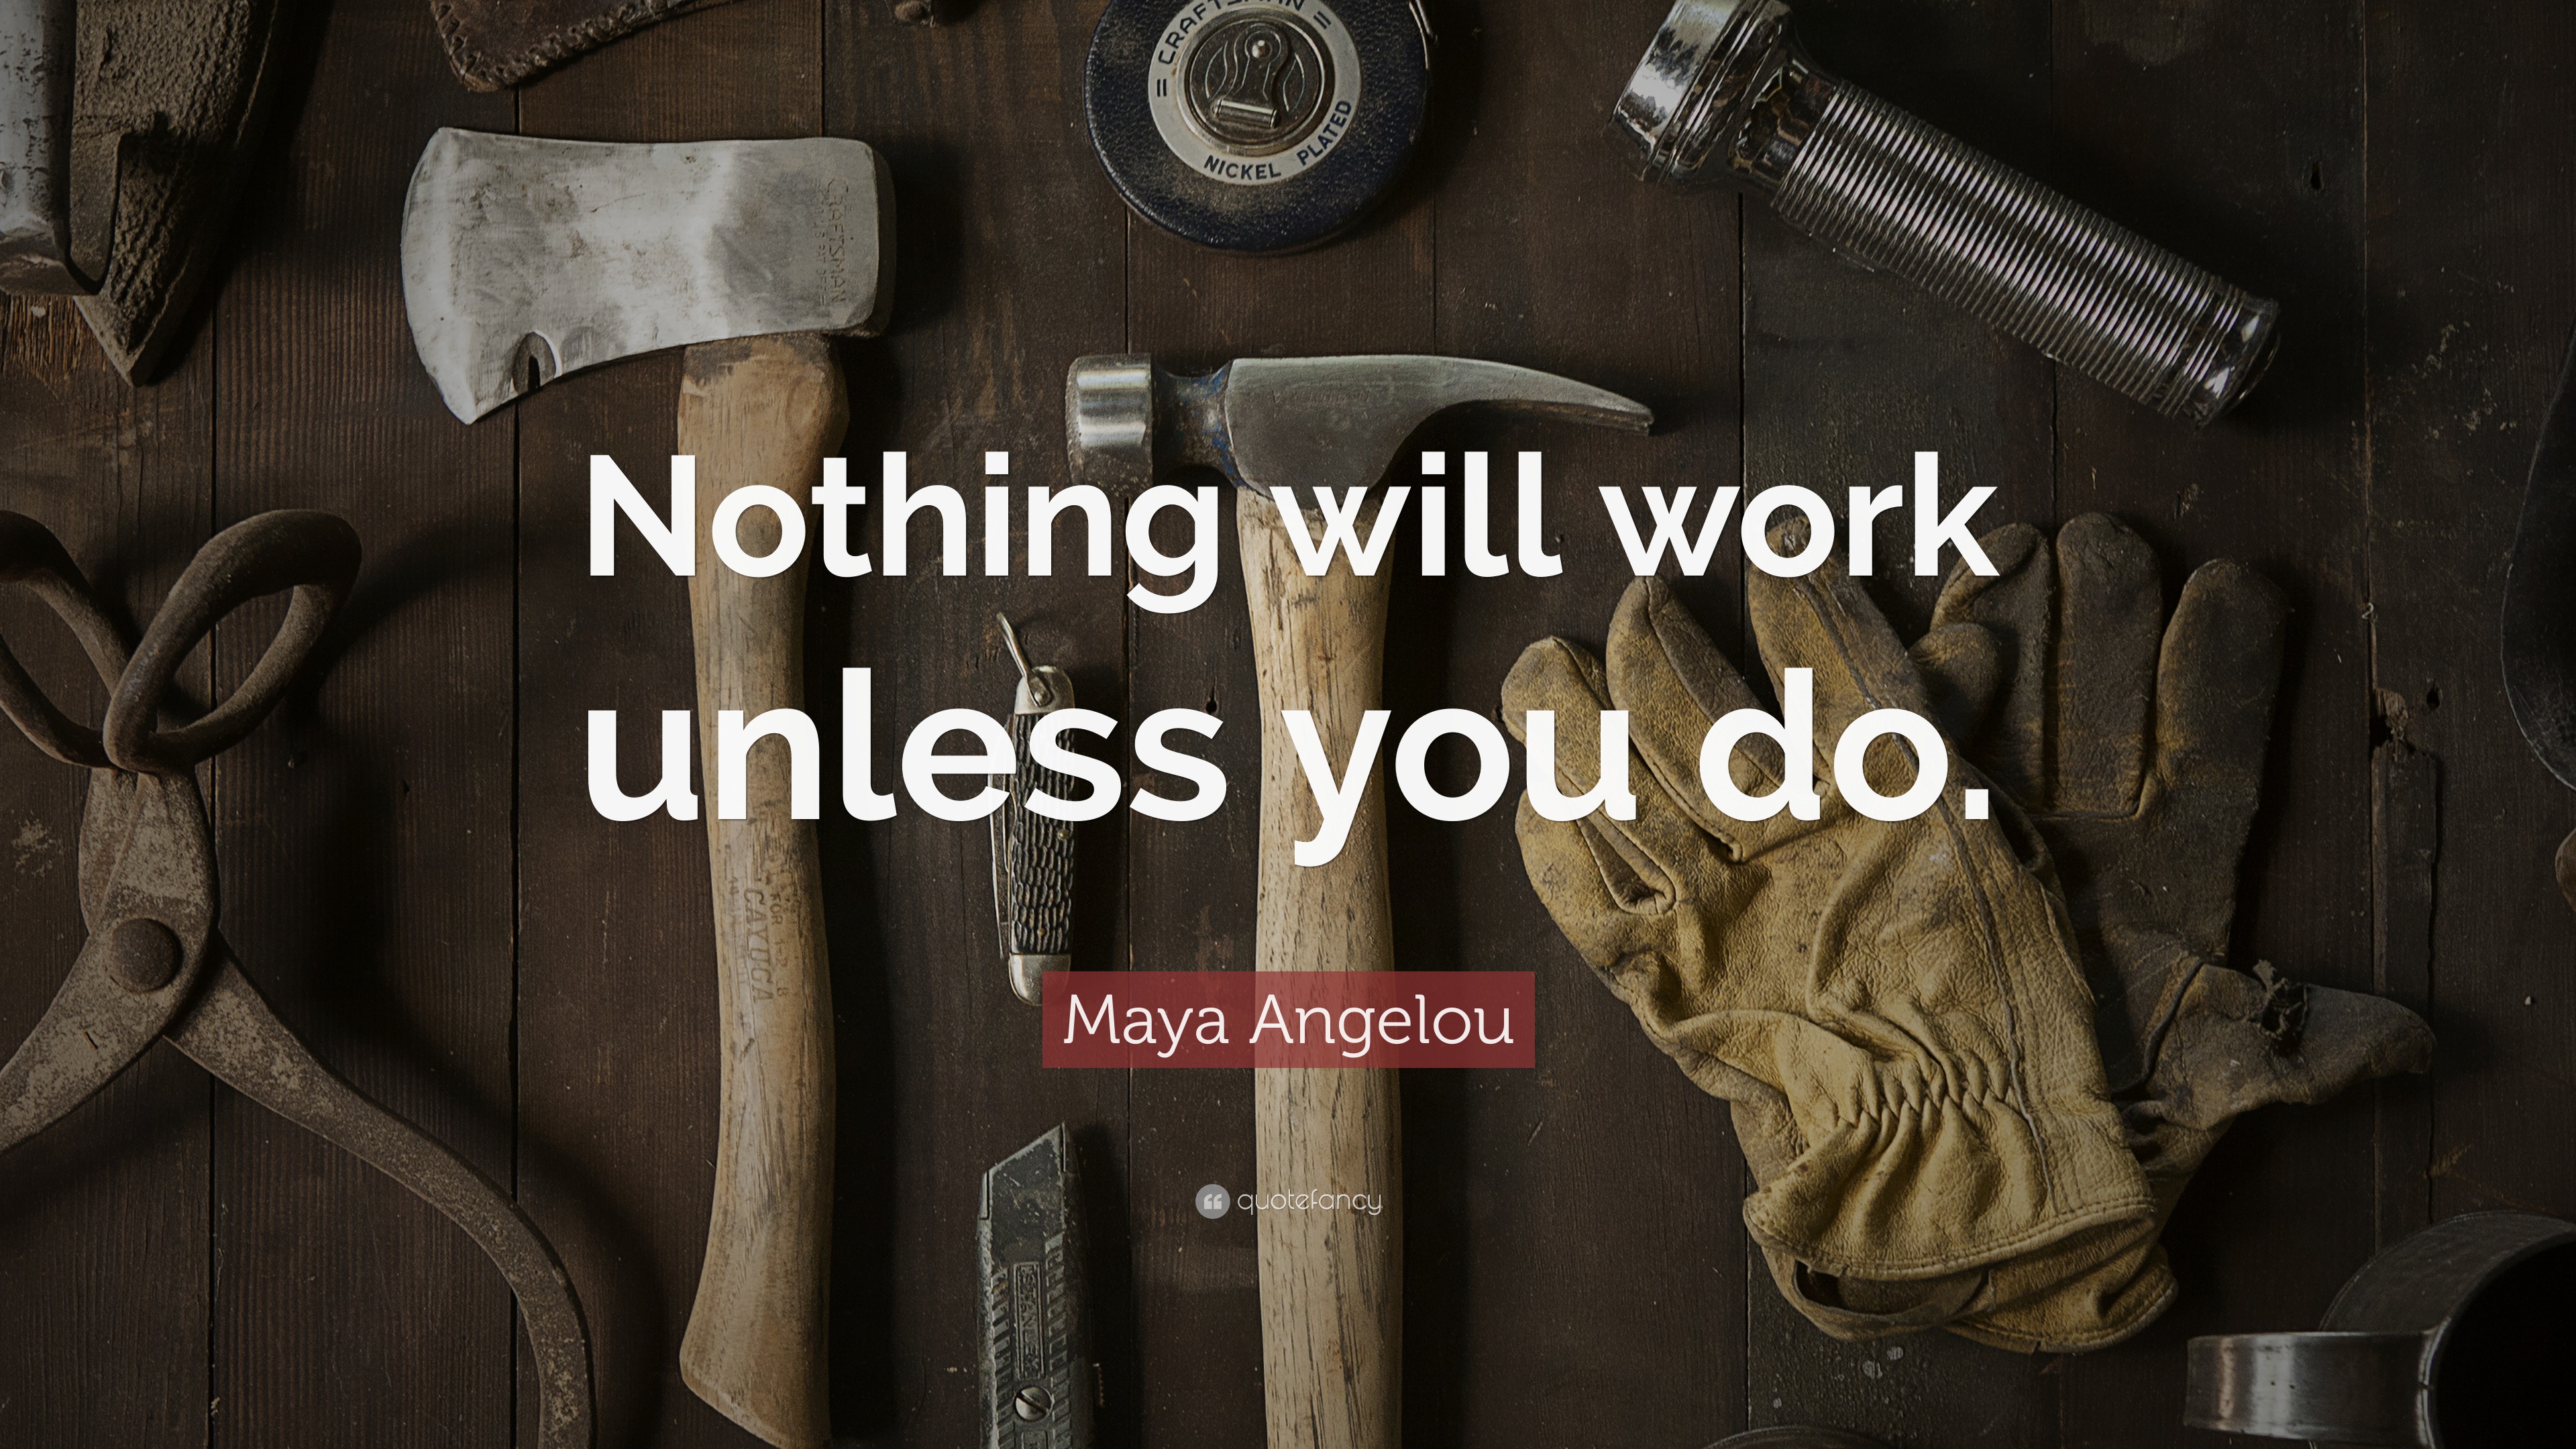 https://quotefancy.com/media/wallpaper/3840x2160/6360926-Maya-Angelou-Quote-Nothing-will-work-unless-you-do.jpg